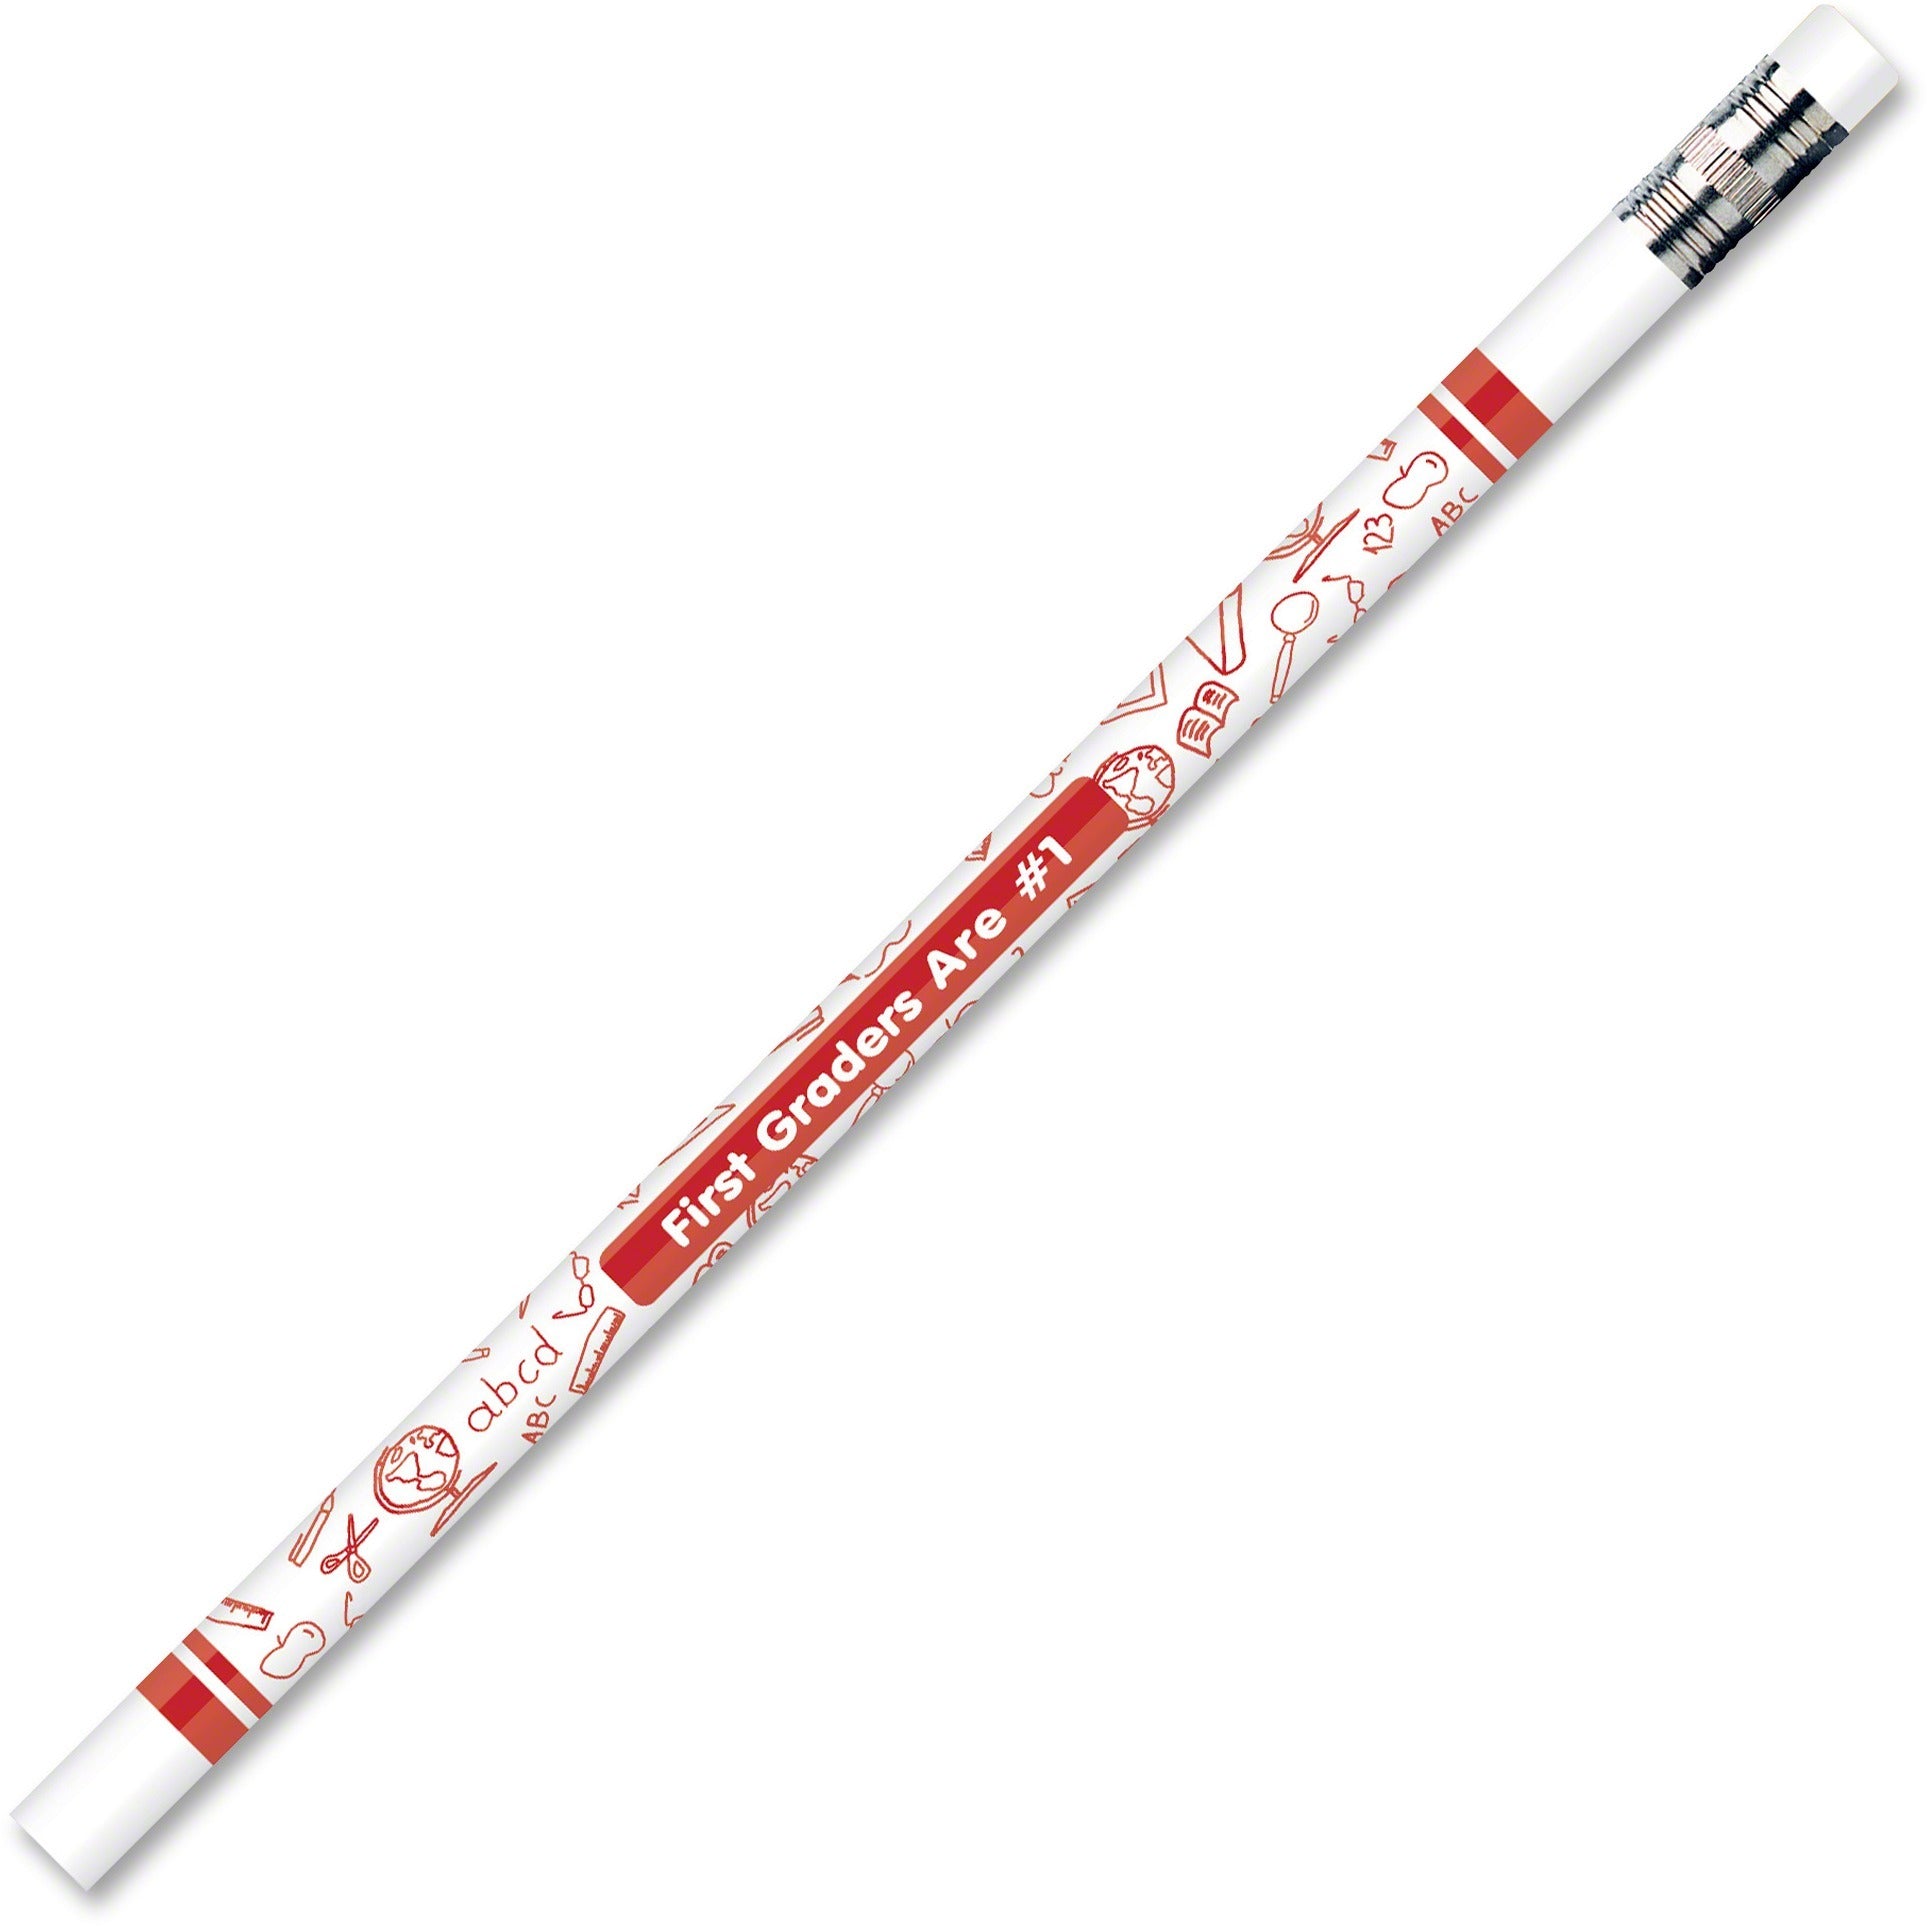 JR Moon's First Graders are #1 Pencils, Red, Blue, Green, Pack of 12 (00378)